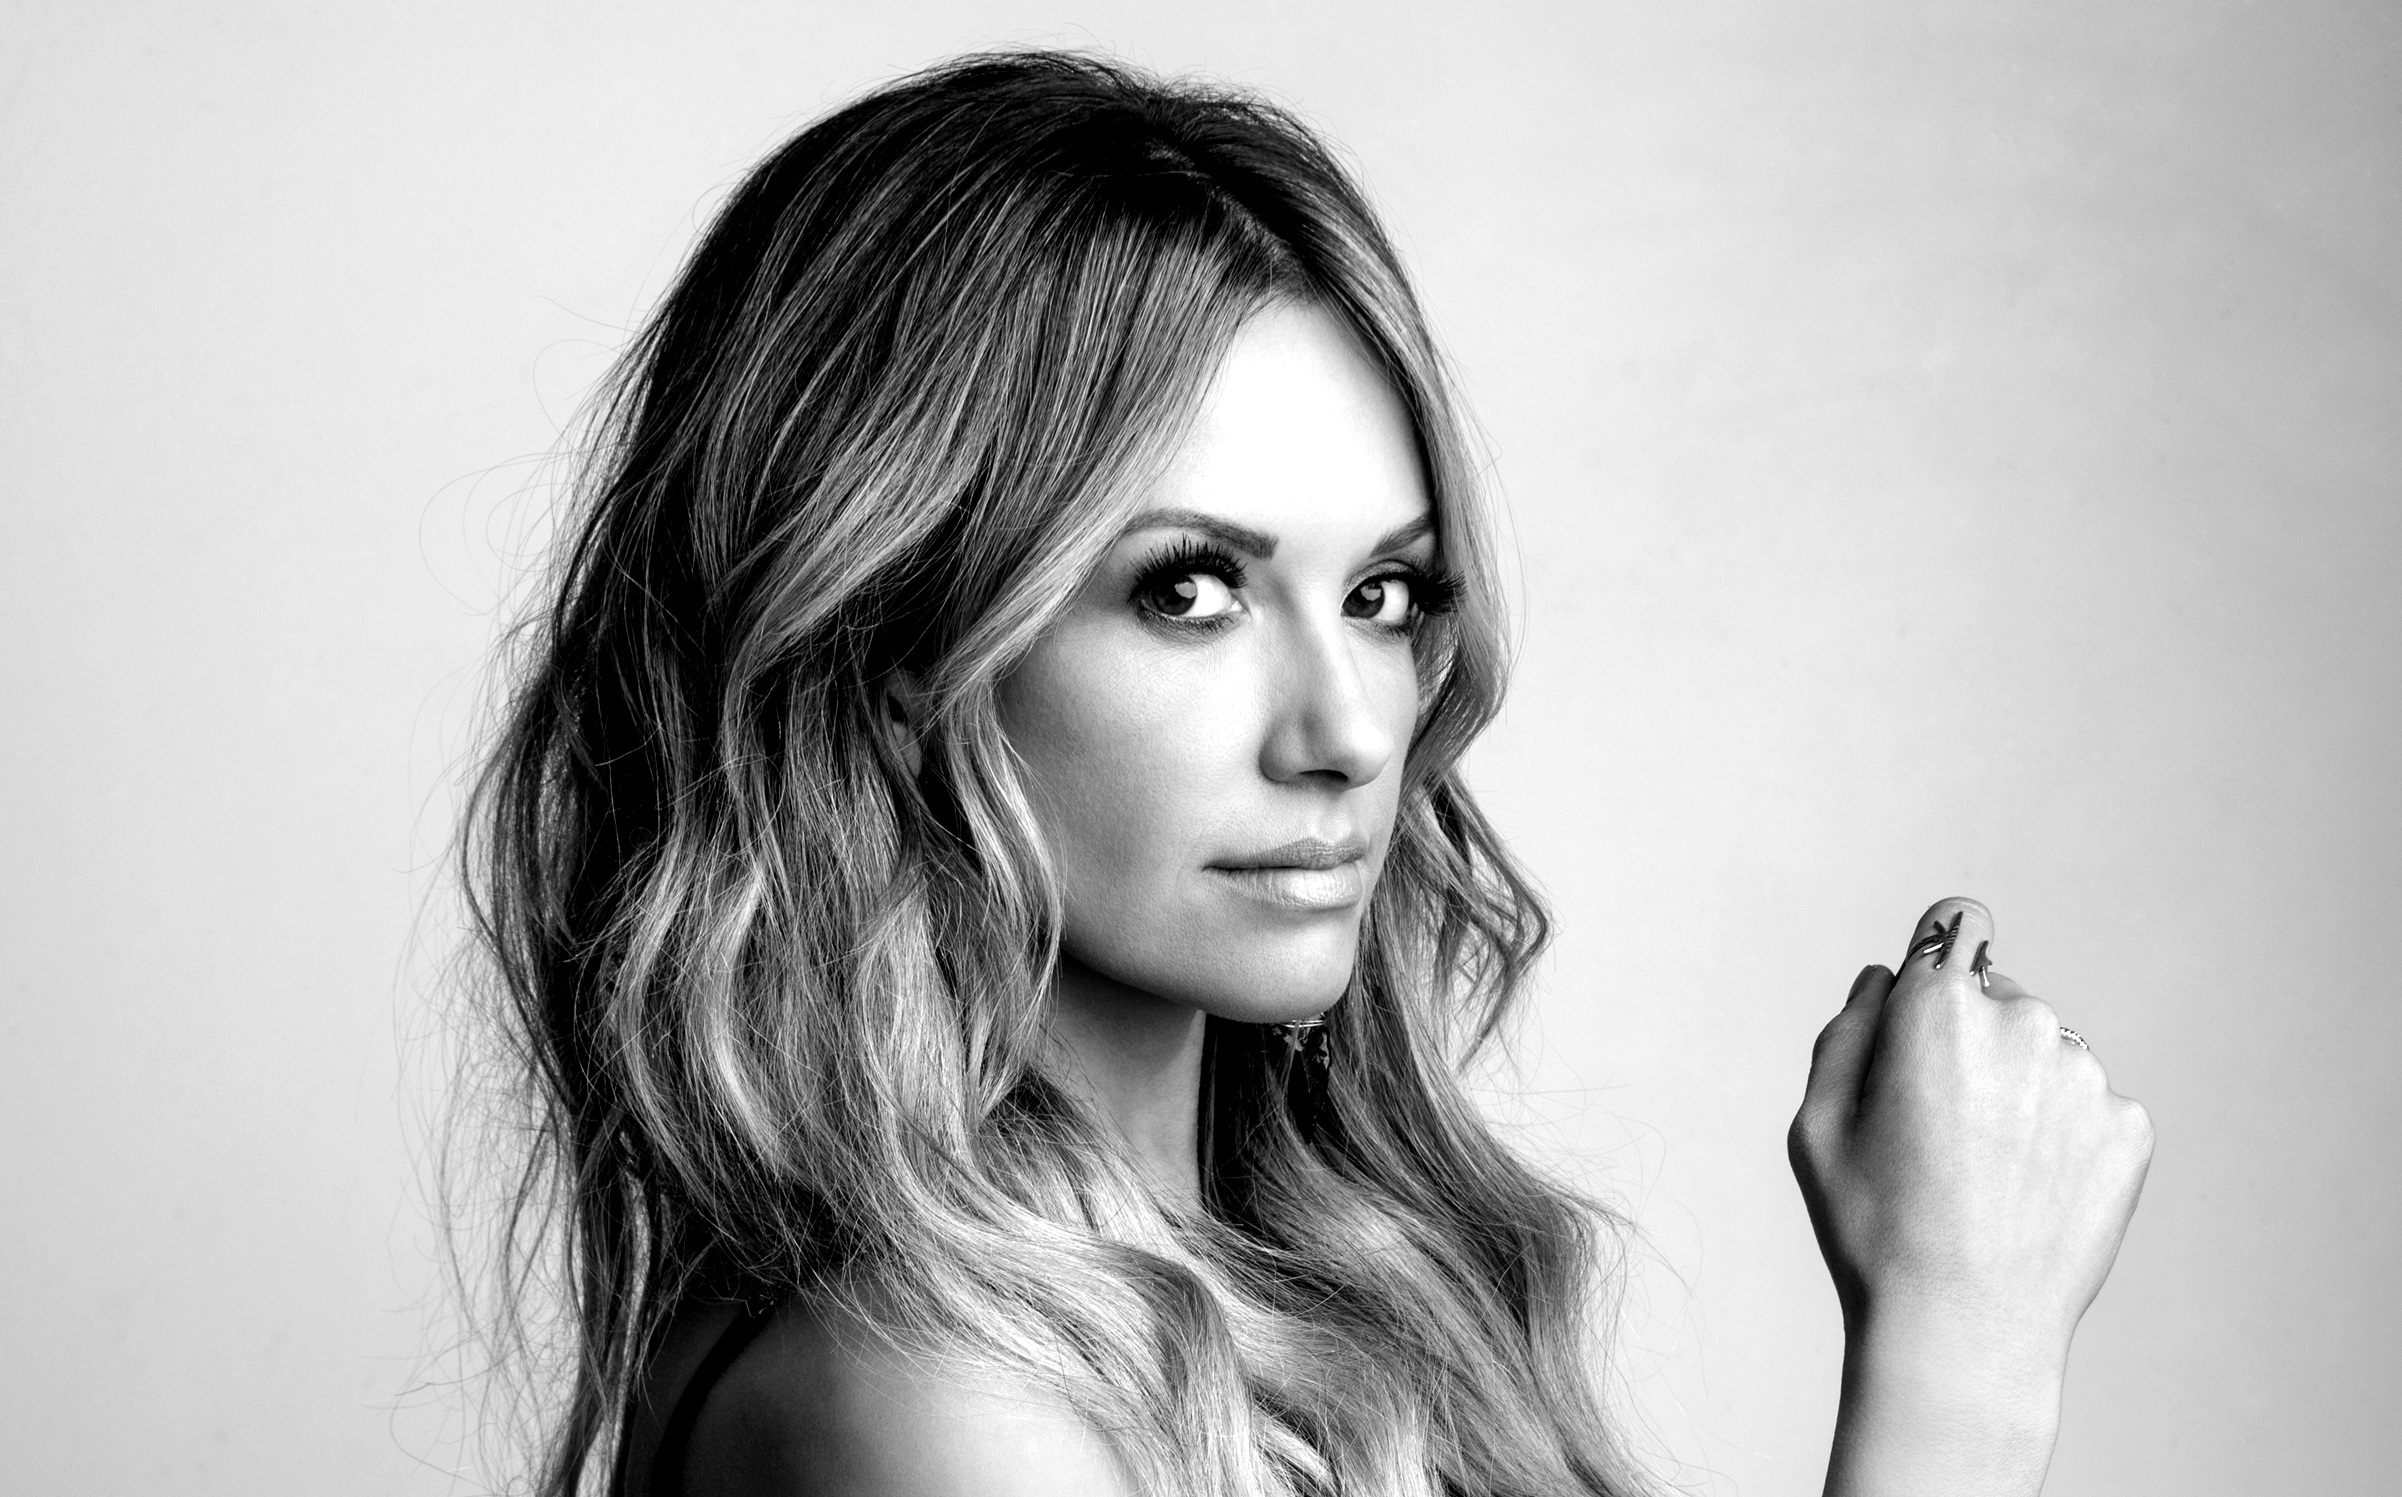 Carly Pearce Wallpapers (29+ images inside)